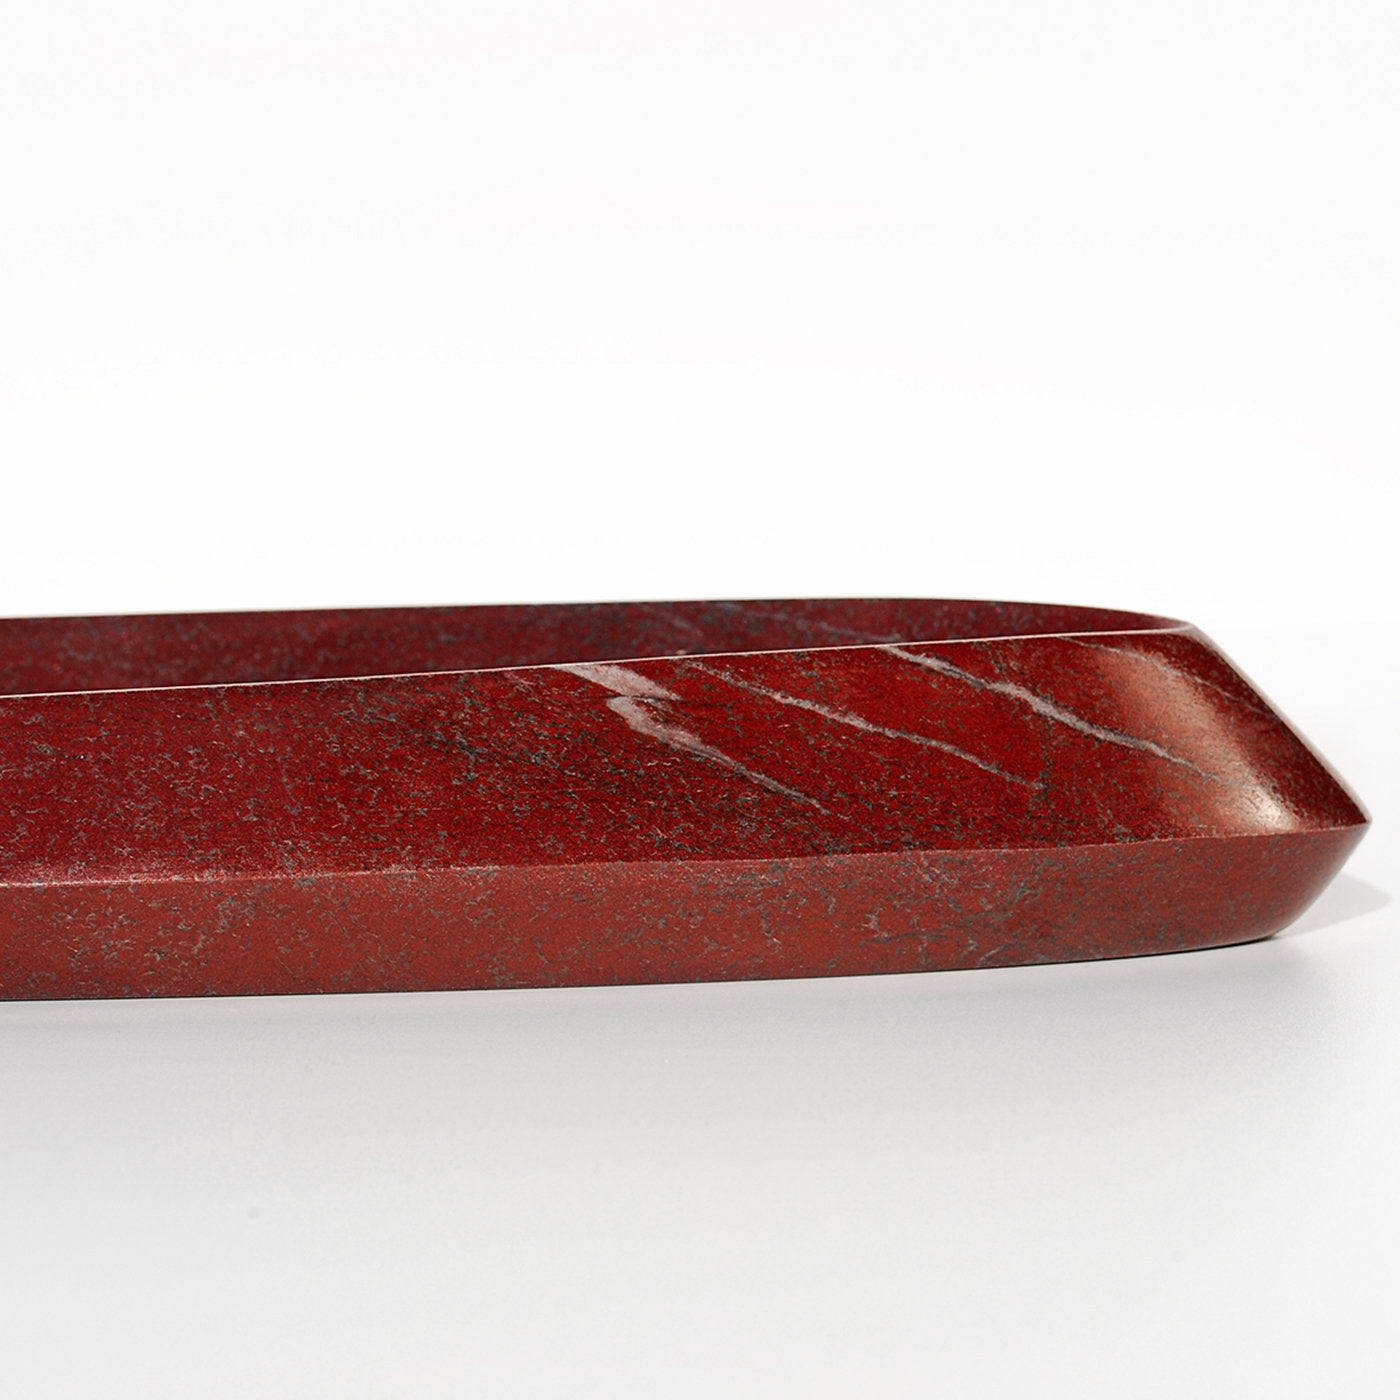 Ipazia Ruby Red Fruit Bowl  - Alternative view 5